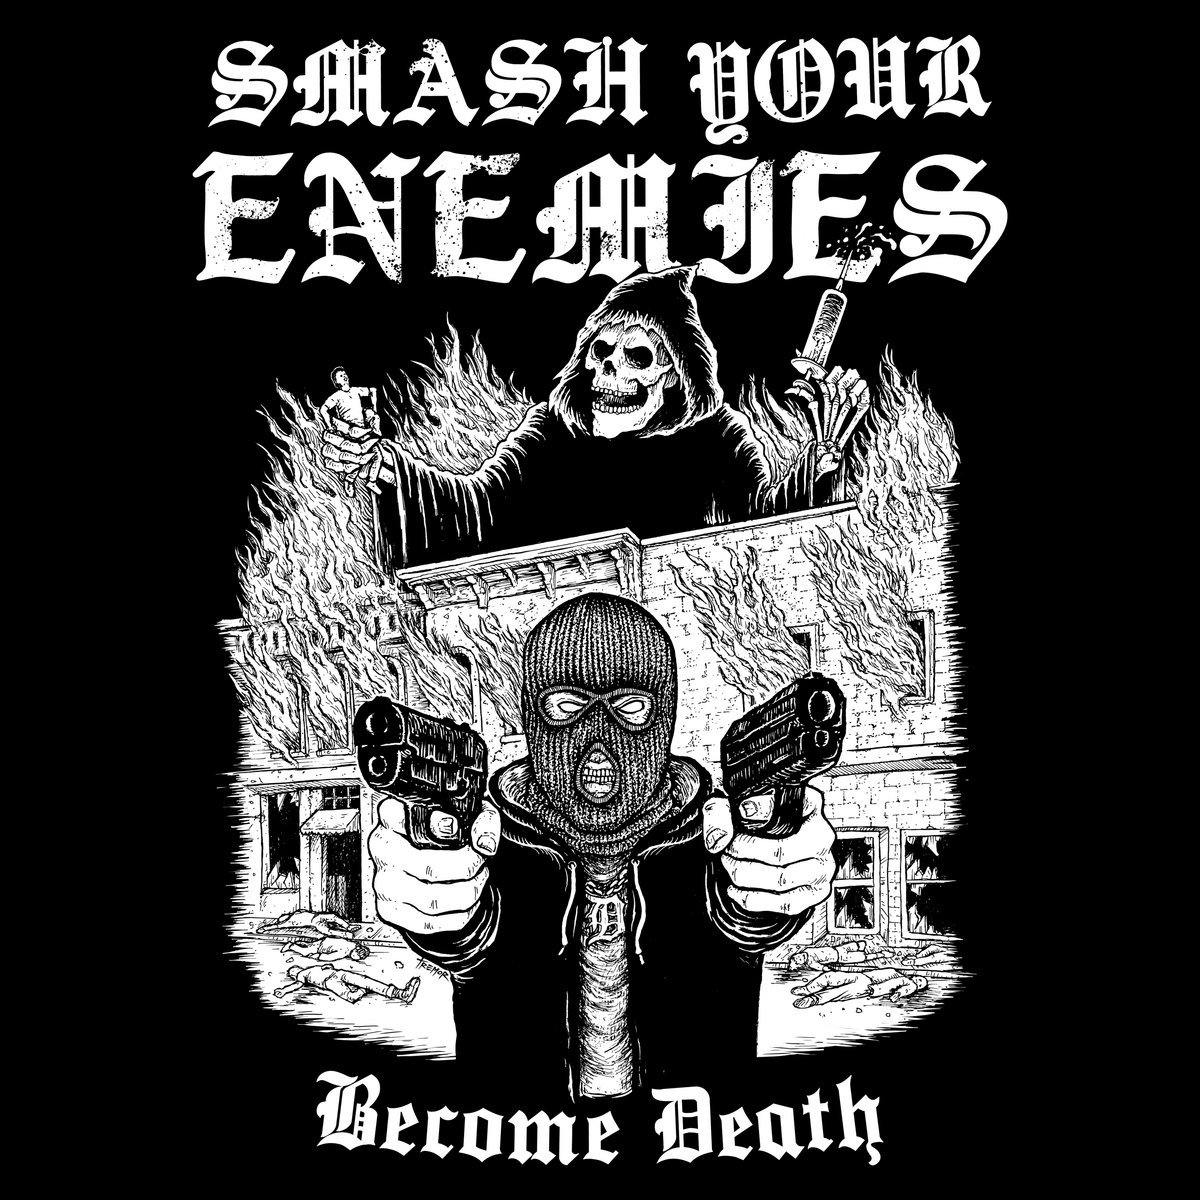 Buy – Smash Your Enemies "Become Death" CD – Band & Music Merch – Cold Cuts Merch